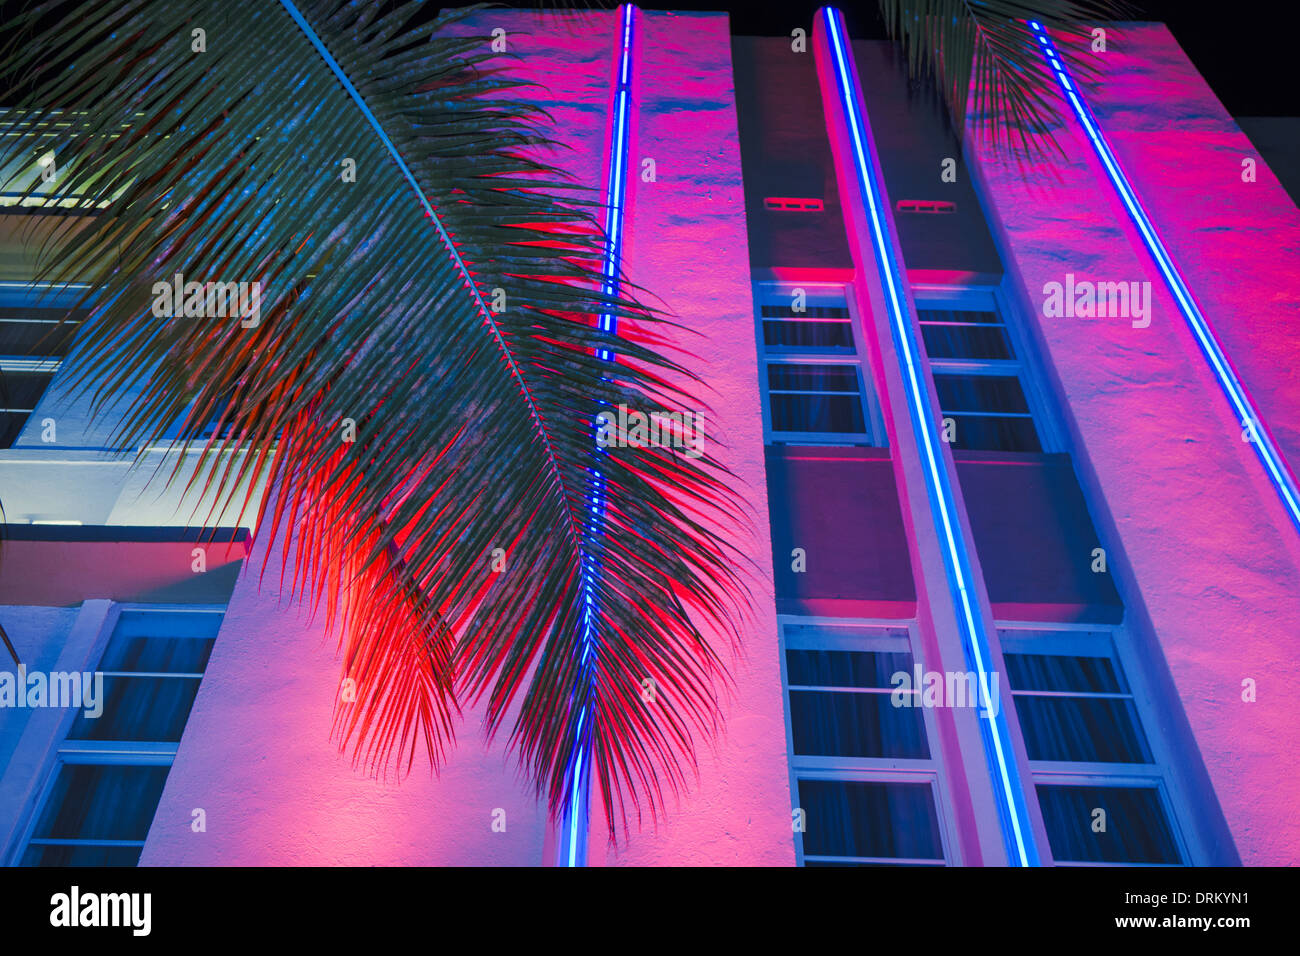 Miami Beach Florida,Ocean Drive,Lord Balfour,hotel,hotel,hotels,night,neon,outside exterior,building,FL140122014 Stock Photo